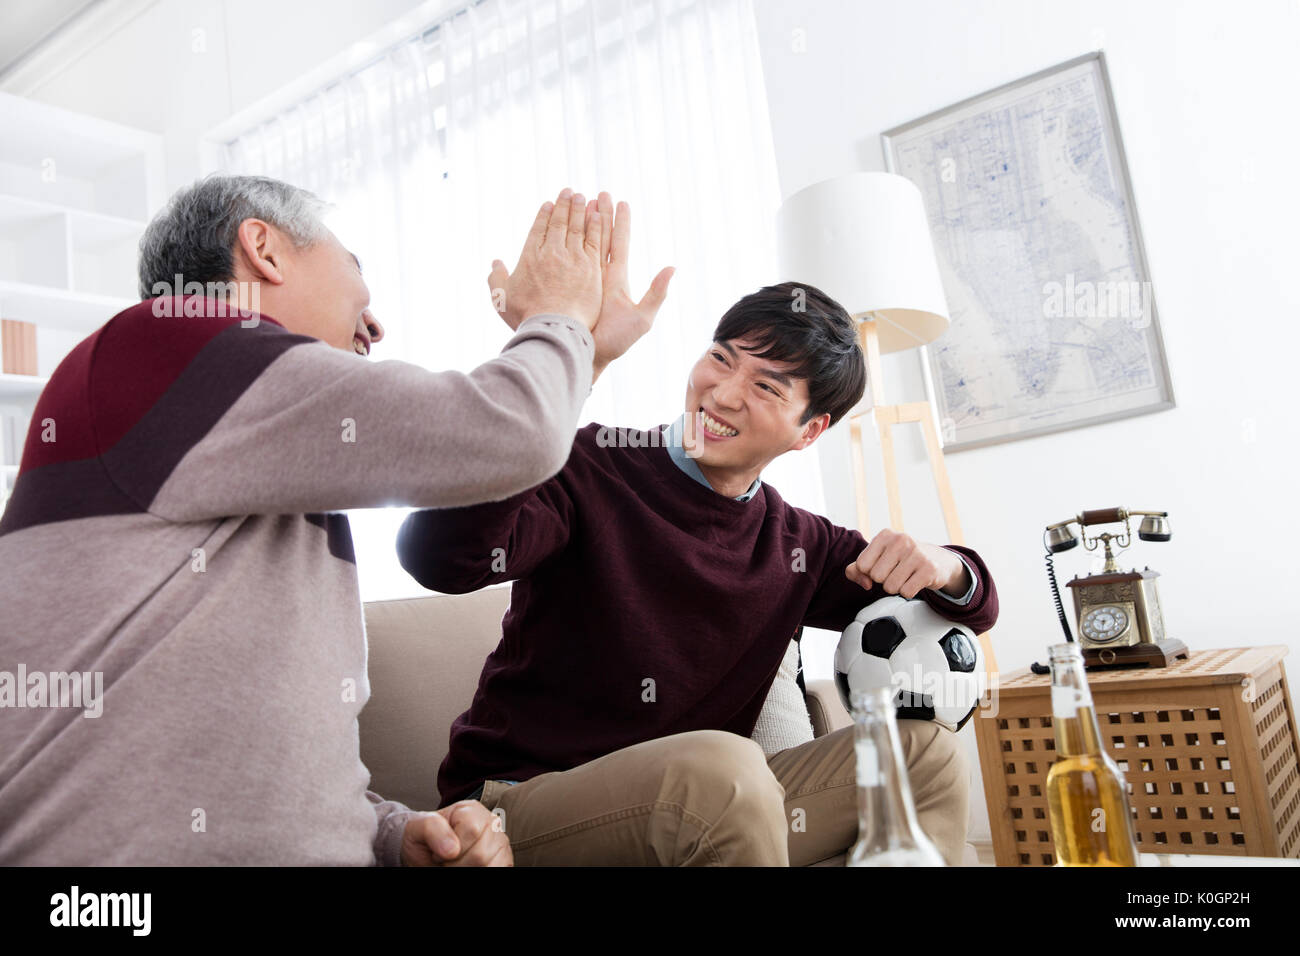 Smiling senior man and his young son slapping high five Stock Photo